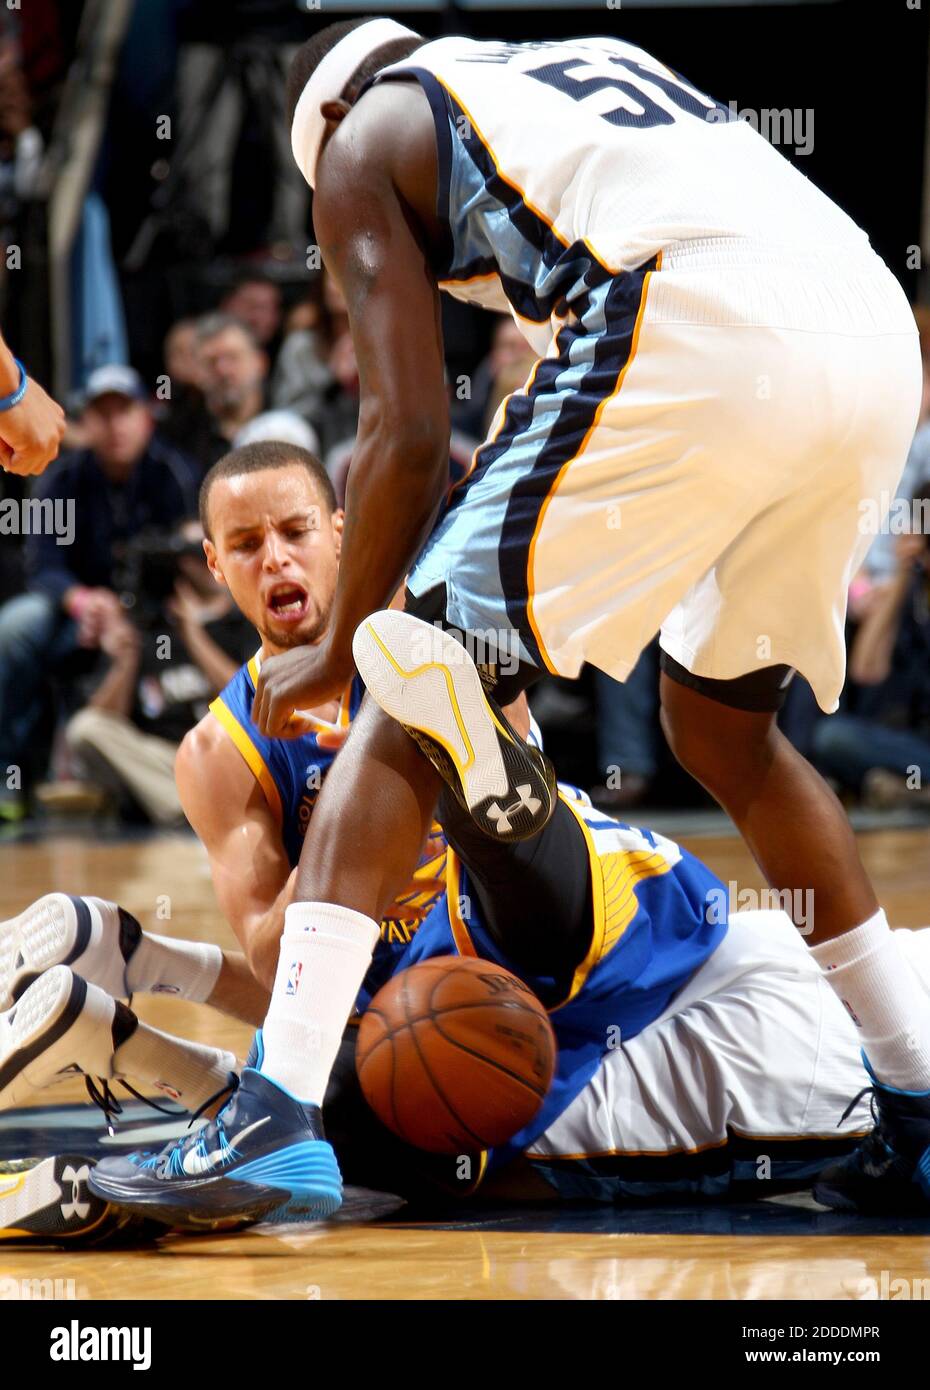 NO FILM, NO VIDEO, NO TV, NO DOCUMENTARY - The Golden State Warriors' Stephen Curry scrambles for a loose ball with the Memphis Grizzlies' Zach Randolph (50) and Beno Udrih at FedExForum in Memphis, TN, USA on December 16, 2014. The Grizzlies won, 105-98. Photo by Nikki Boertman/The Commercial Appeal/ABACAPRESS.COM Stock Photo